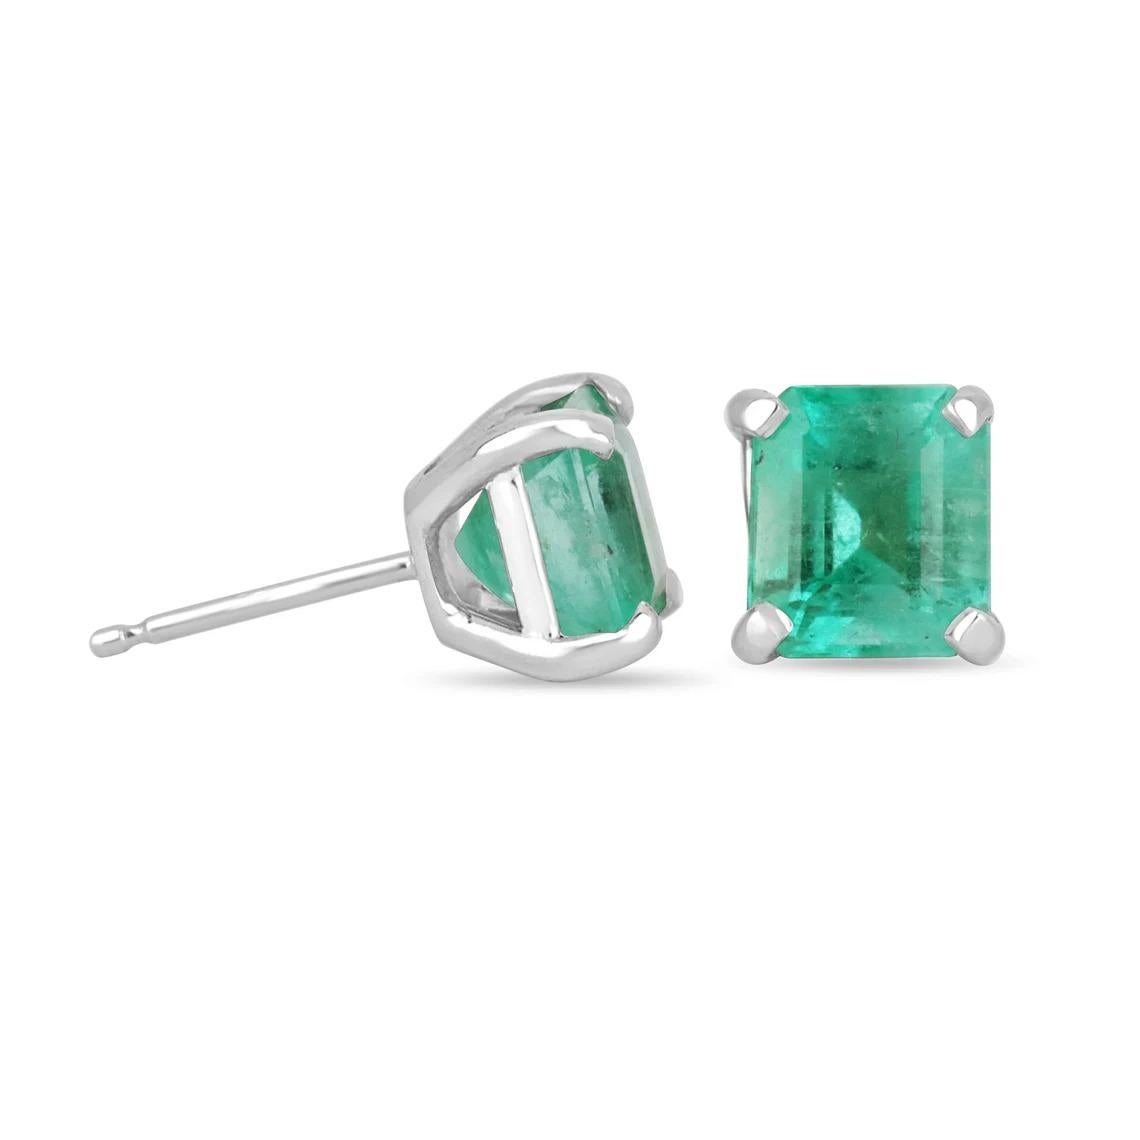 A classic pair of Asscher-cut green natural rare Colombian emerald hand-made gold studs in solid 14K white gold. These rare earrings feature two bluish sea green, natural earth mined Colombian emeralds that are handset in a single four-prong